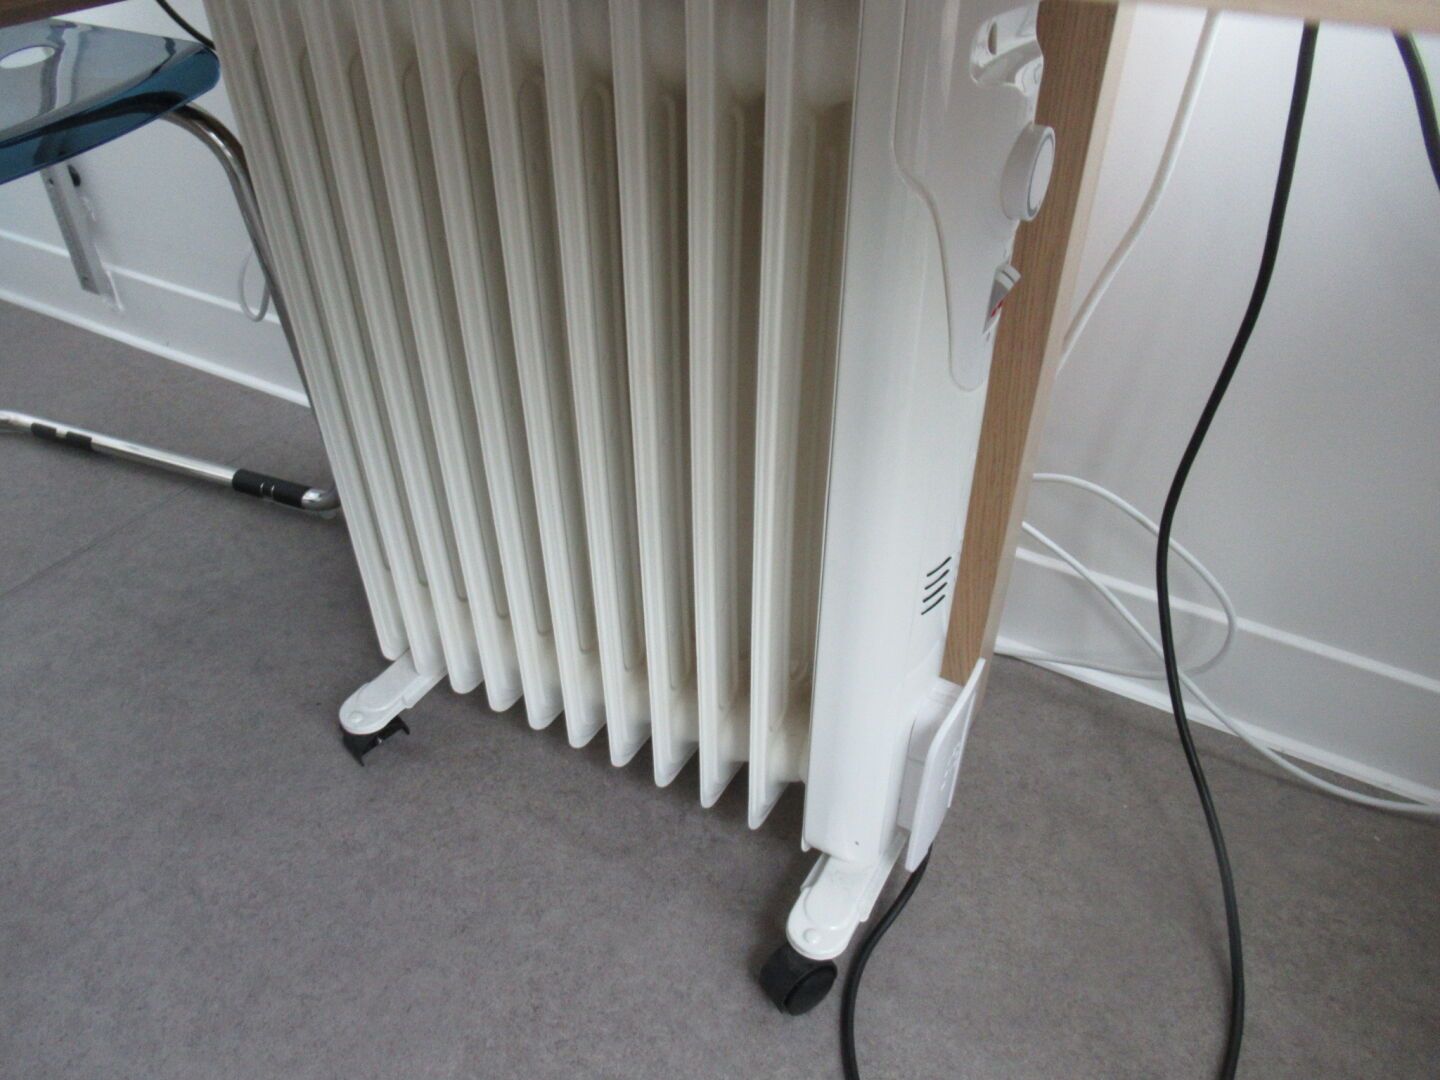 Null 2 electric space heaters